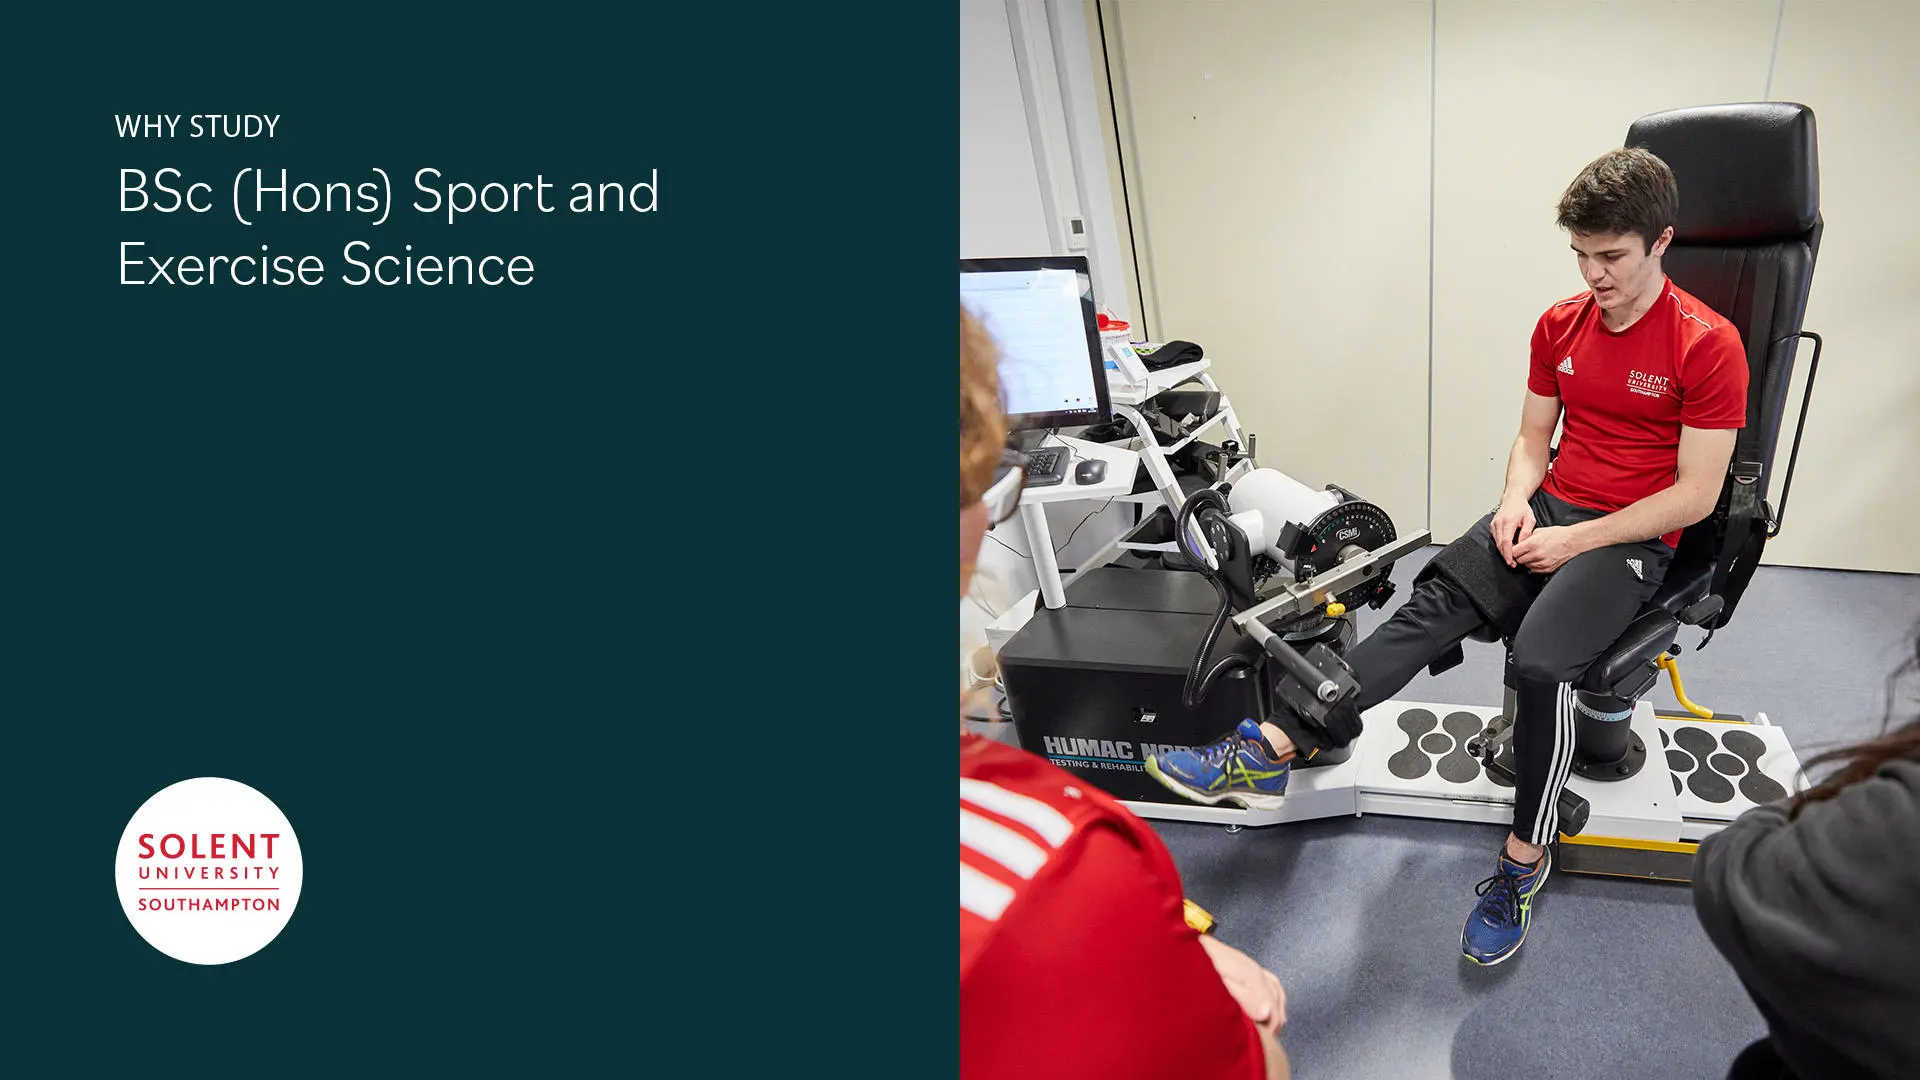 Image reads Why study BSc (Hons) Sport and Exercise Science